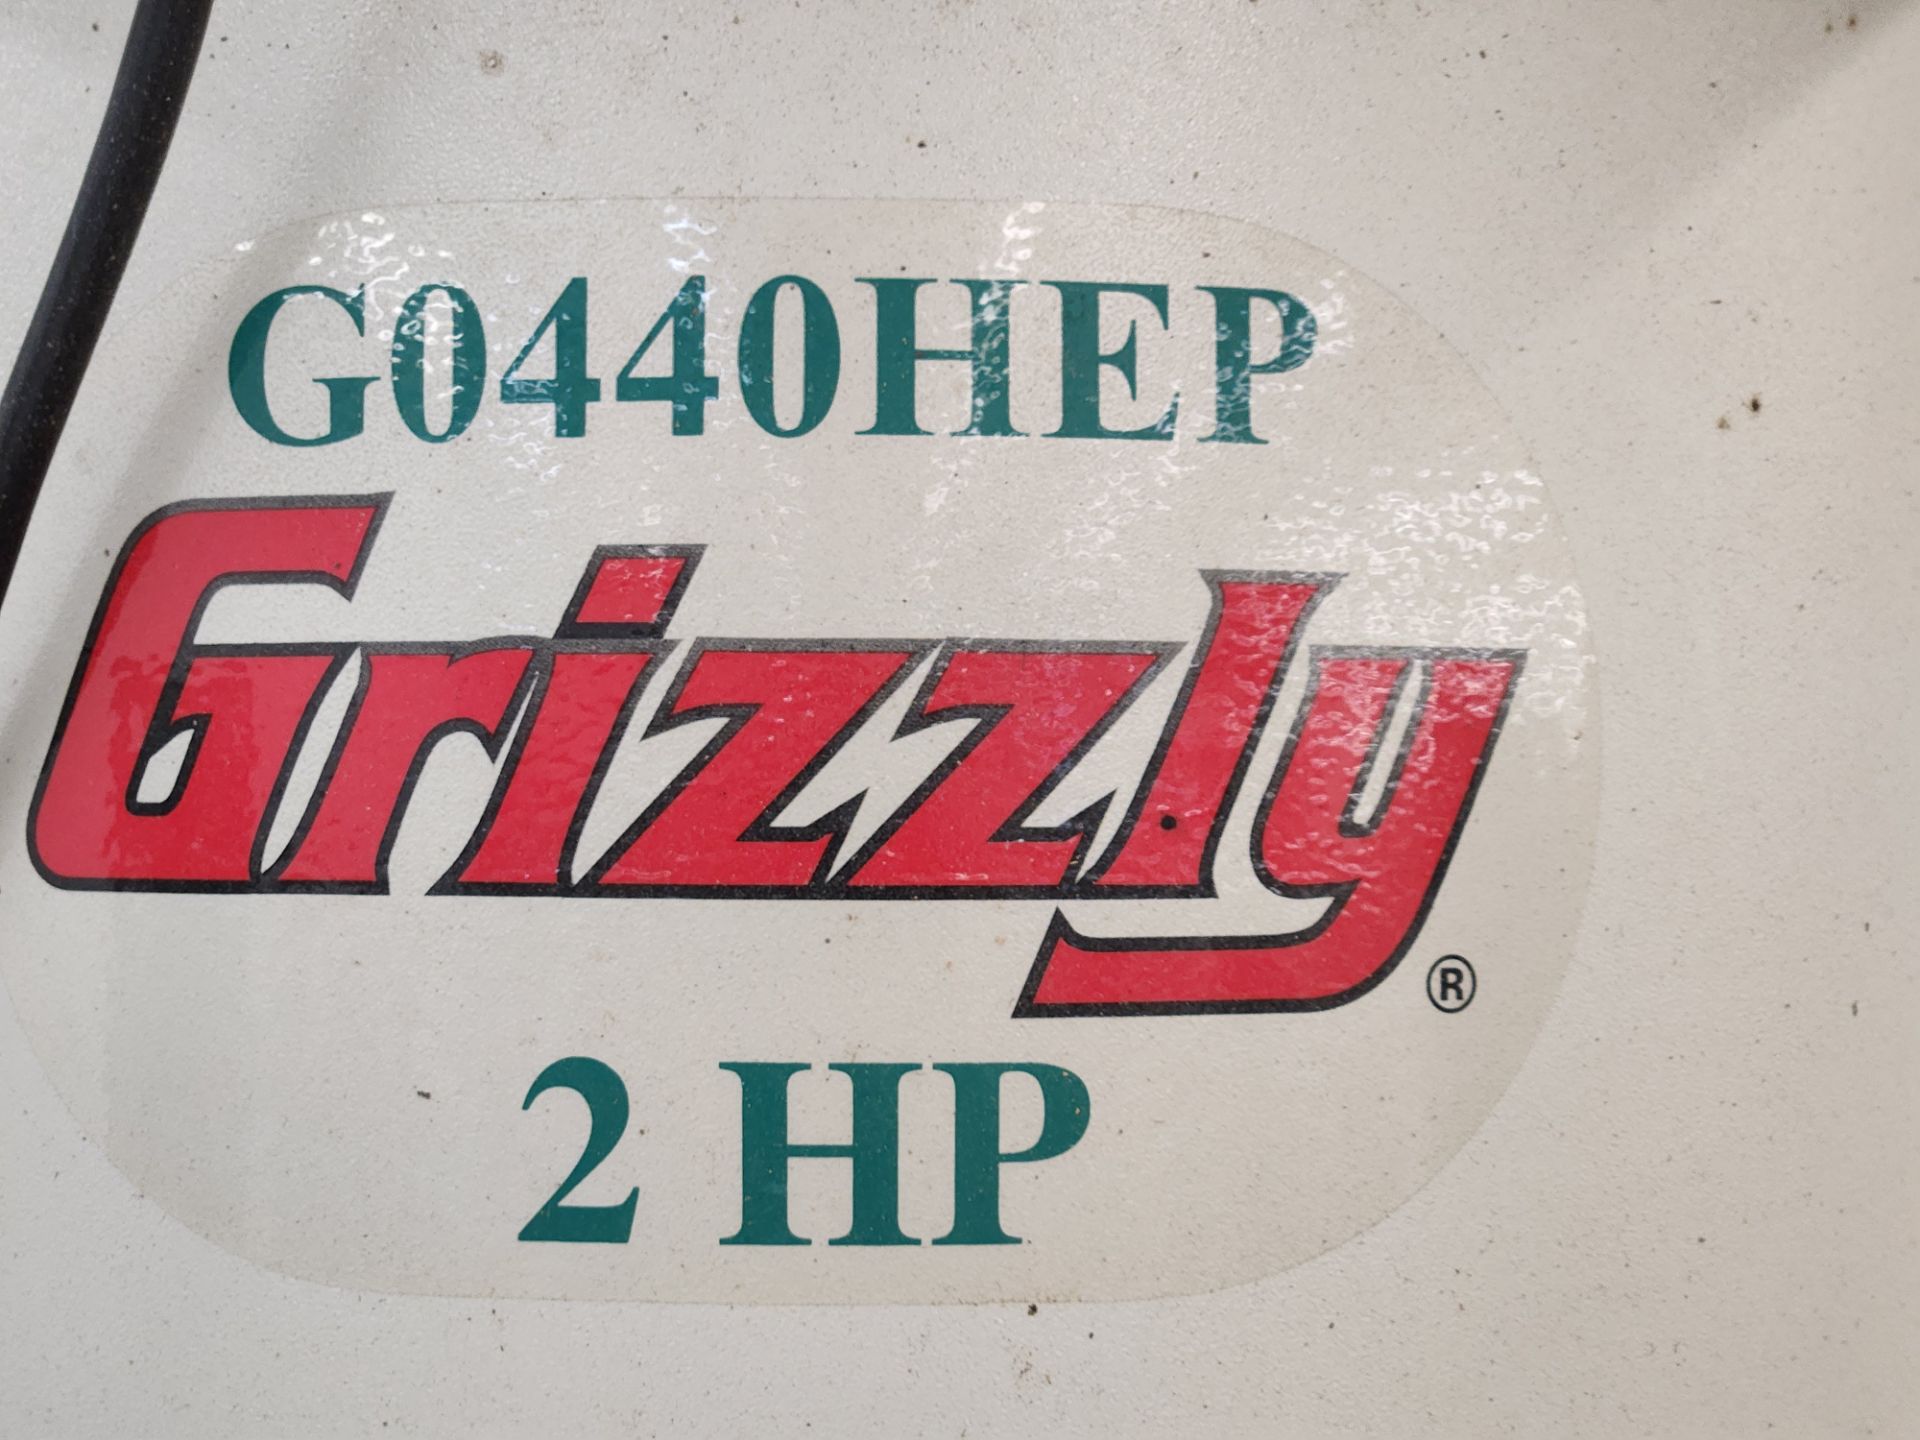 Grizzly Dual Filtration HEPA Cyclone Dust Collector - Bild 4 aus 7